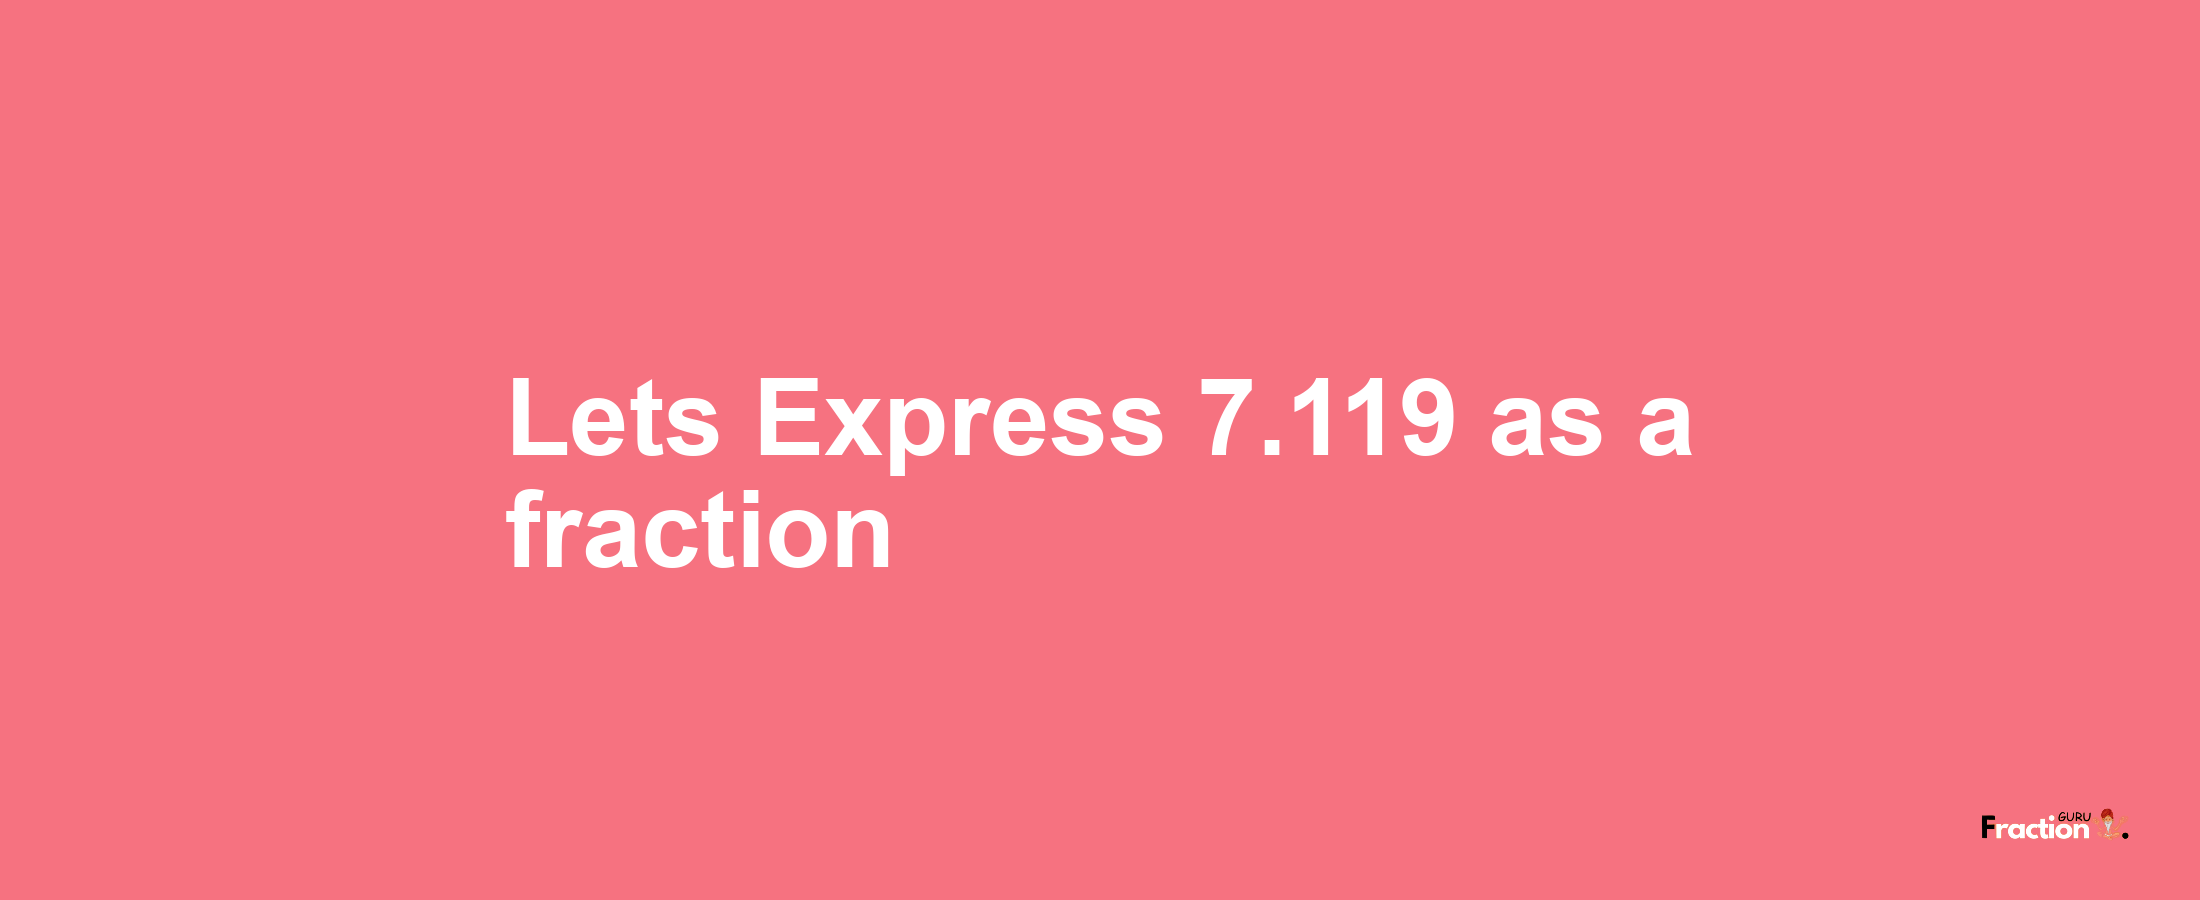 Lets Express 7.119 as afraction